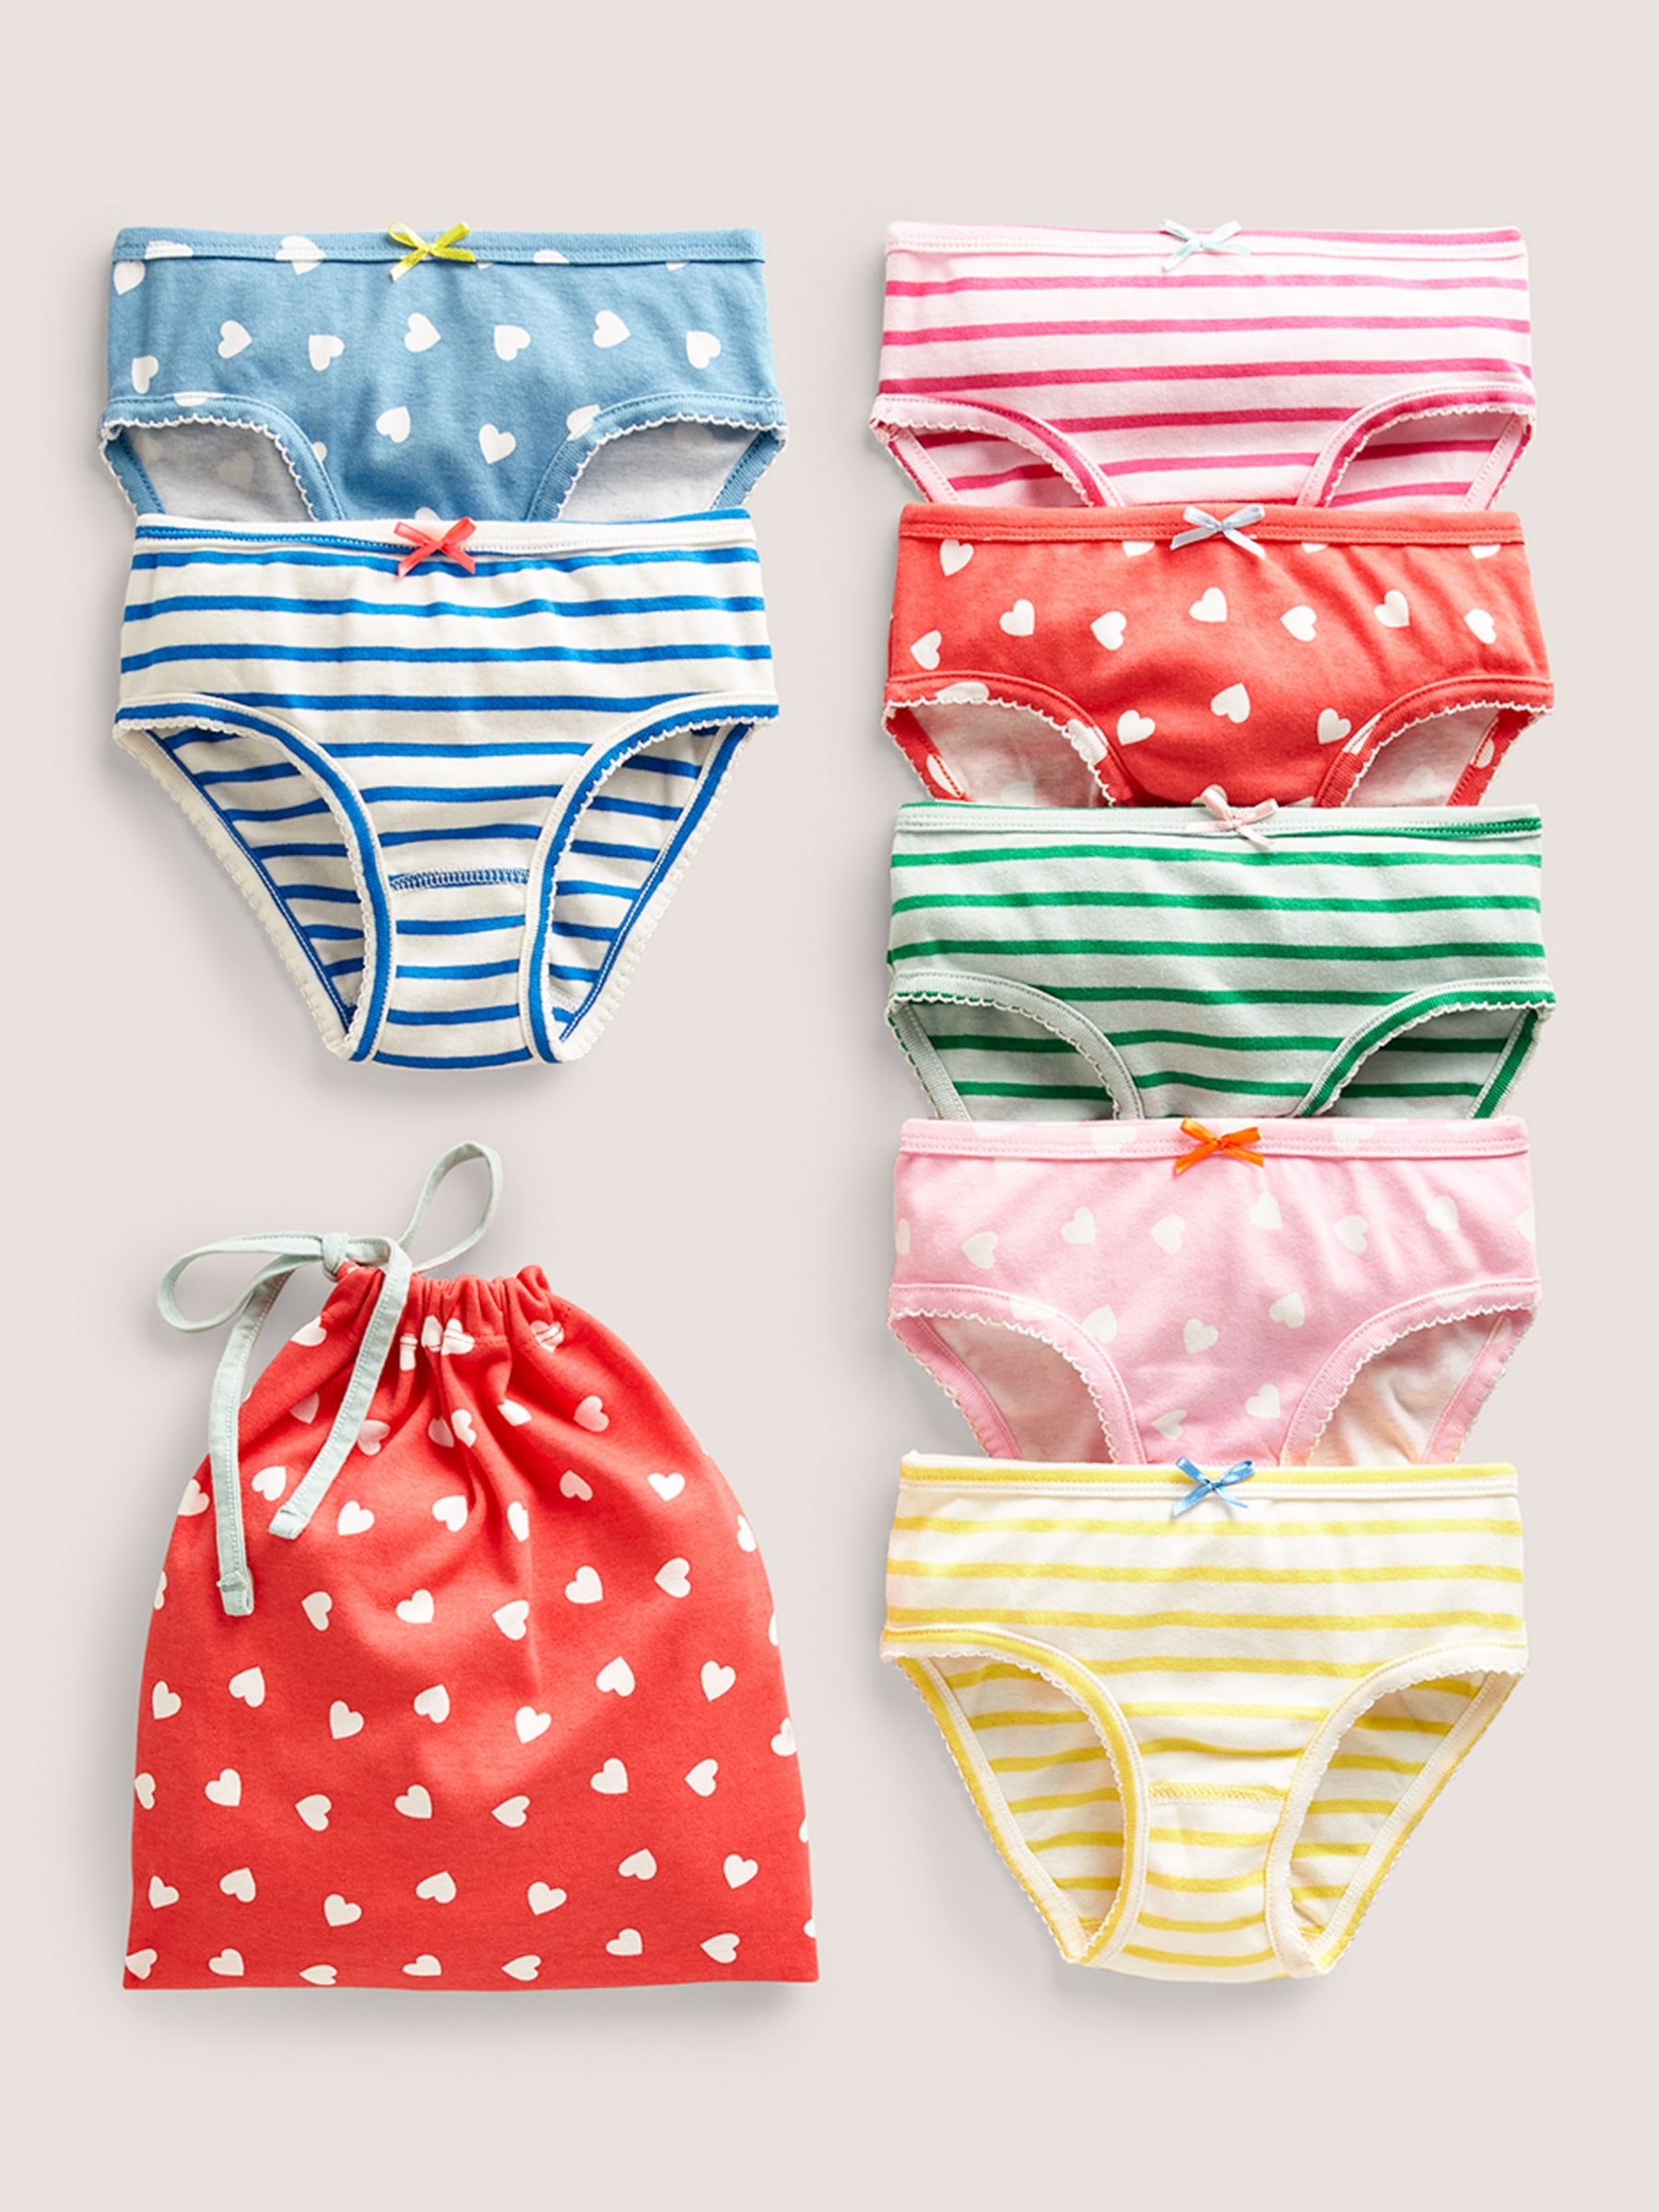 Mini Boden Kids' Heart Knickers, Pack of 7, Multi at John Lewis & Partners